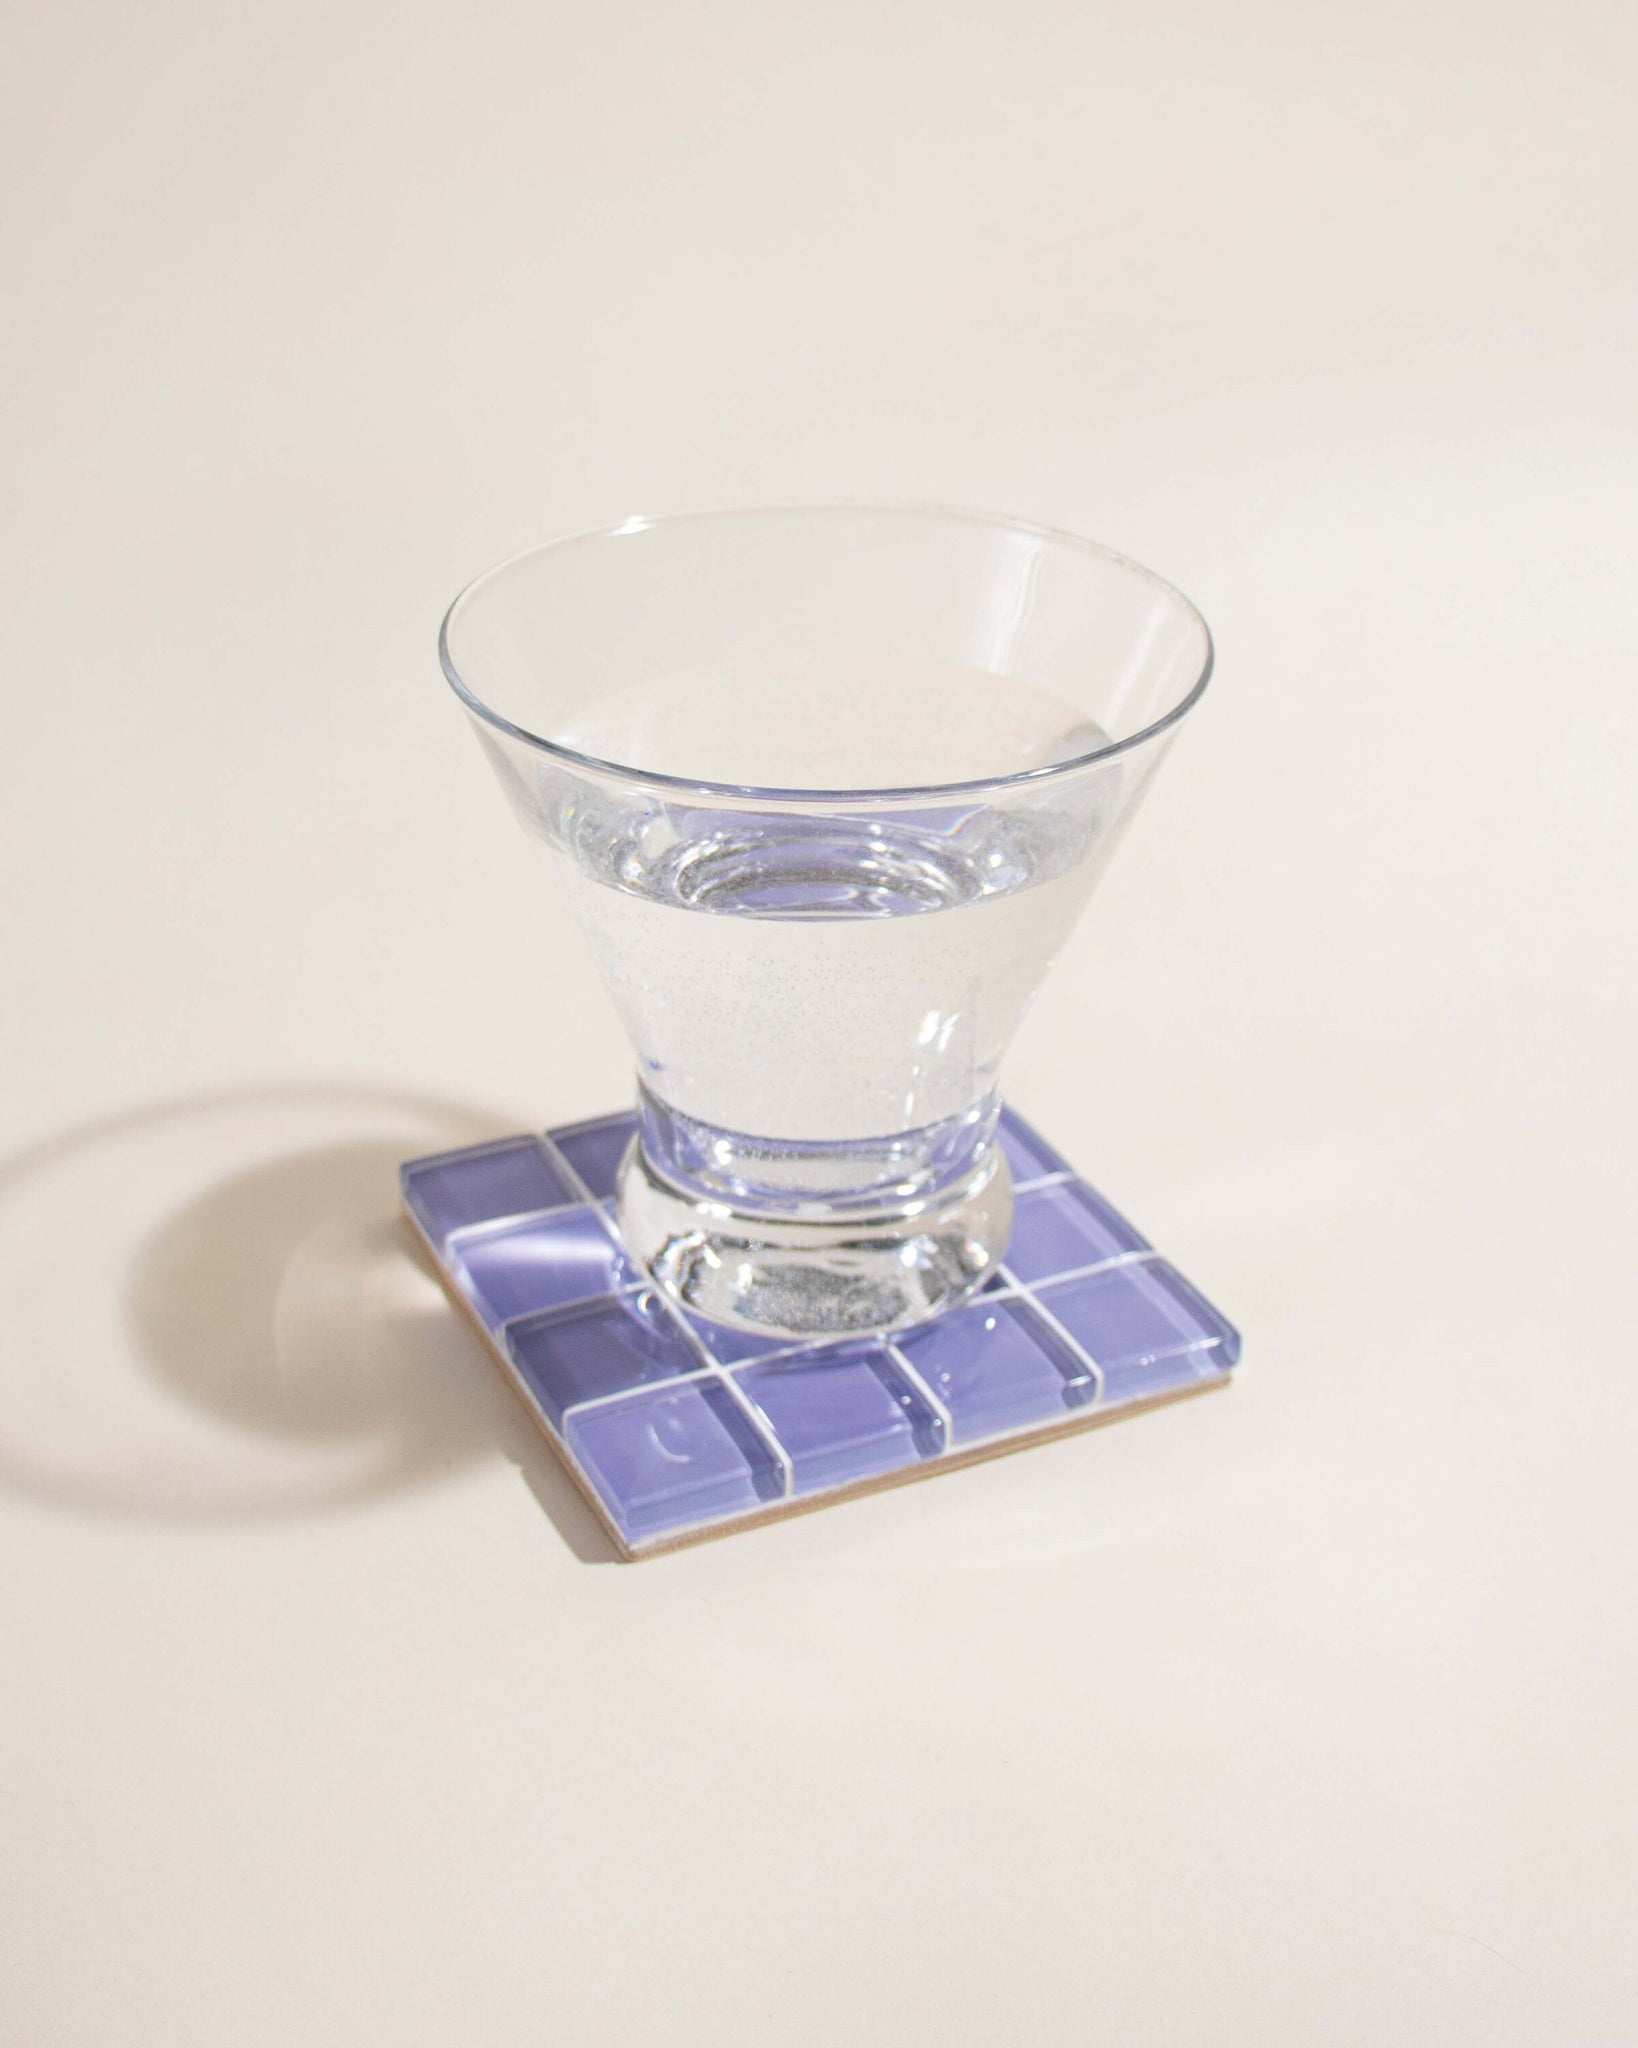 Glass Tile Coaster | Handmade Drink Coaster | Square Coaster | Housewarming Gift | Gift for Her | Gift for Him | Birthday Gifts 4